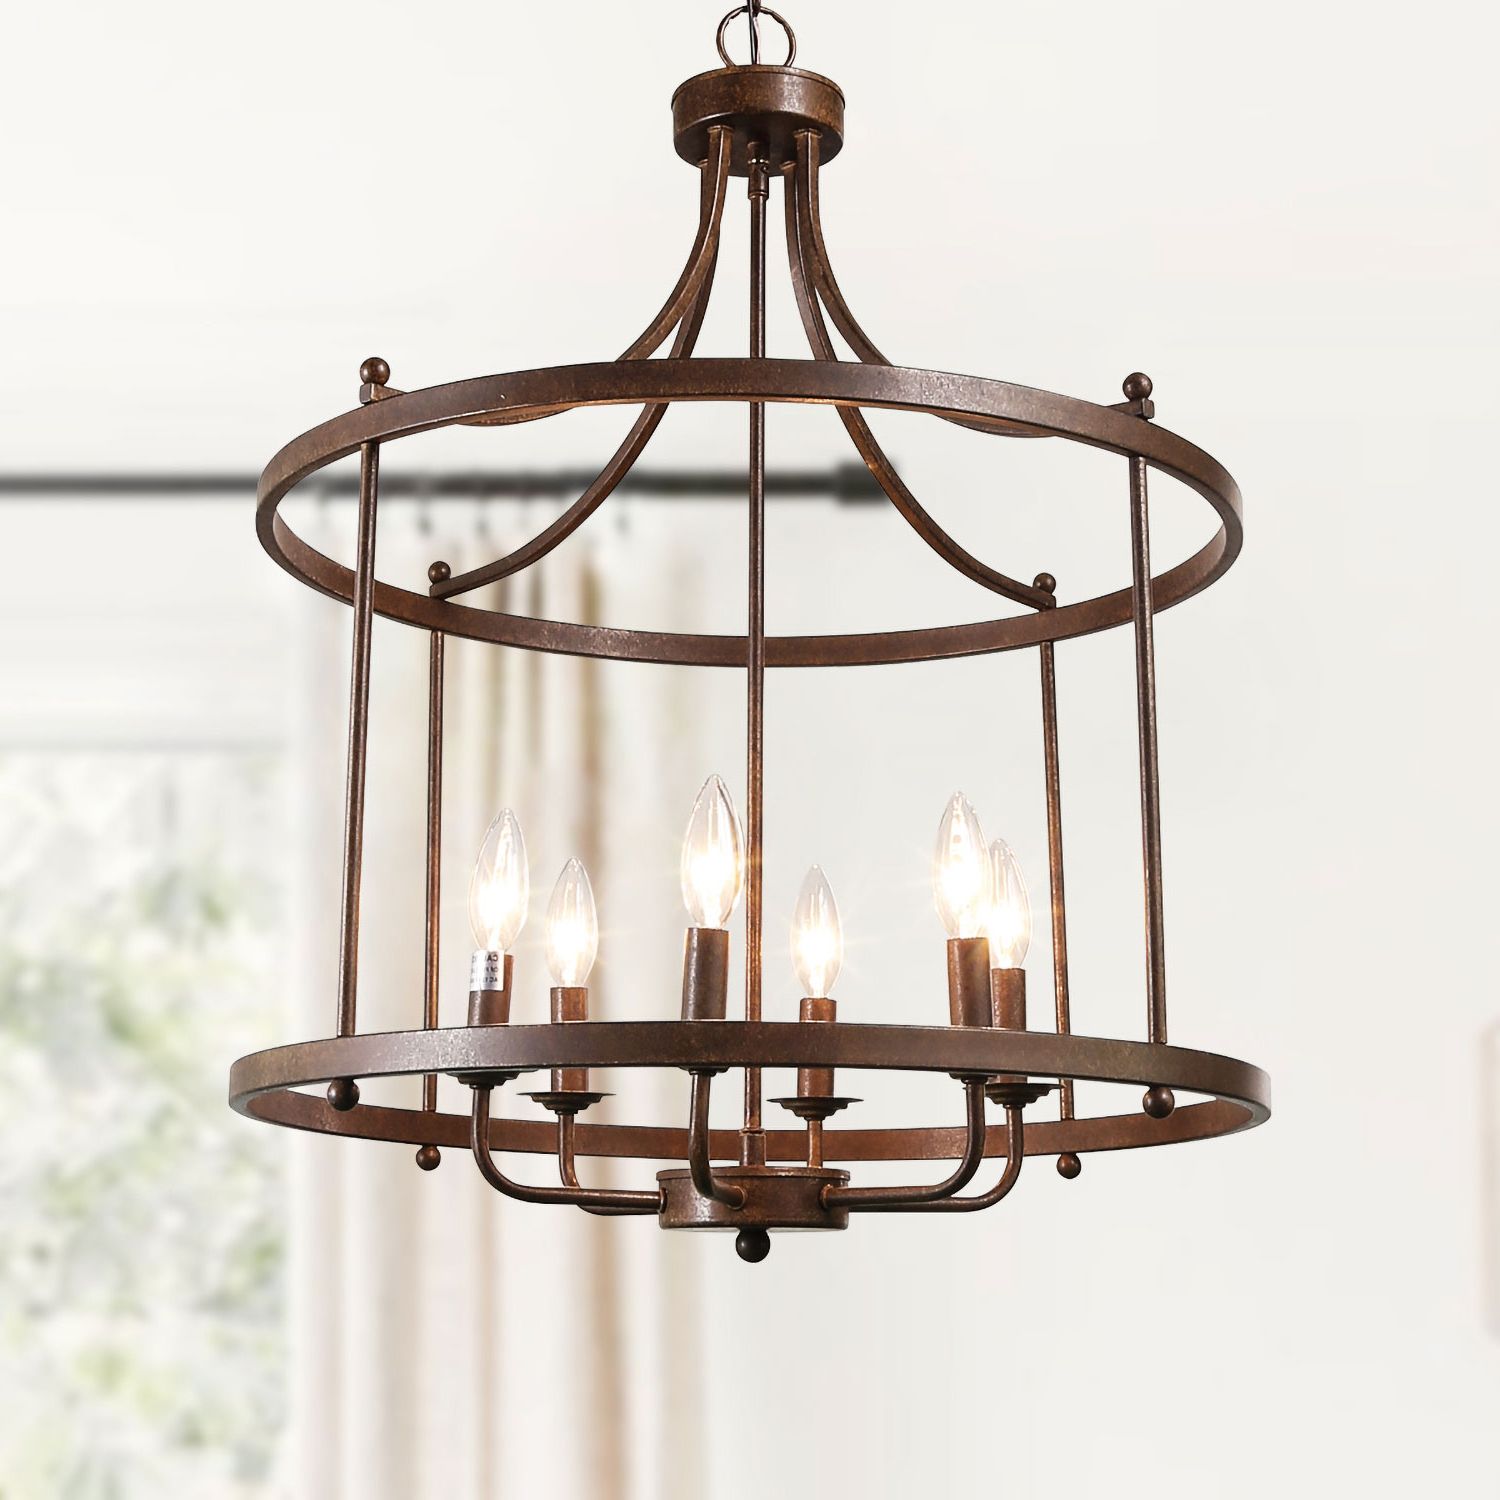 2019 Lnc Mocha 6 Light Antique Rust Bronze Drum Rustic Cage Led Chandelier In  The Chandeliers Department At Lowes Intended For Rusty Gold Lantern Chandeliers (View 10 of 15)